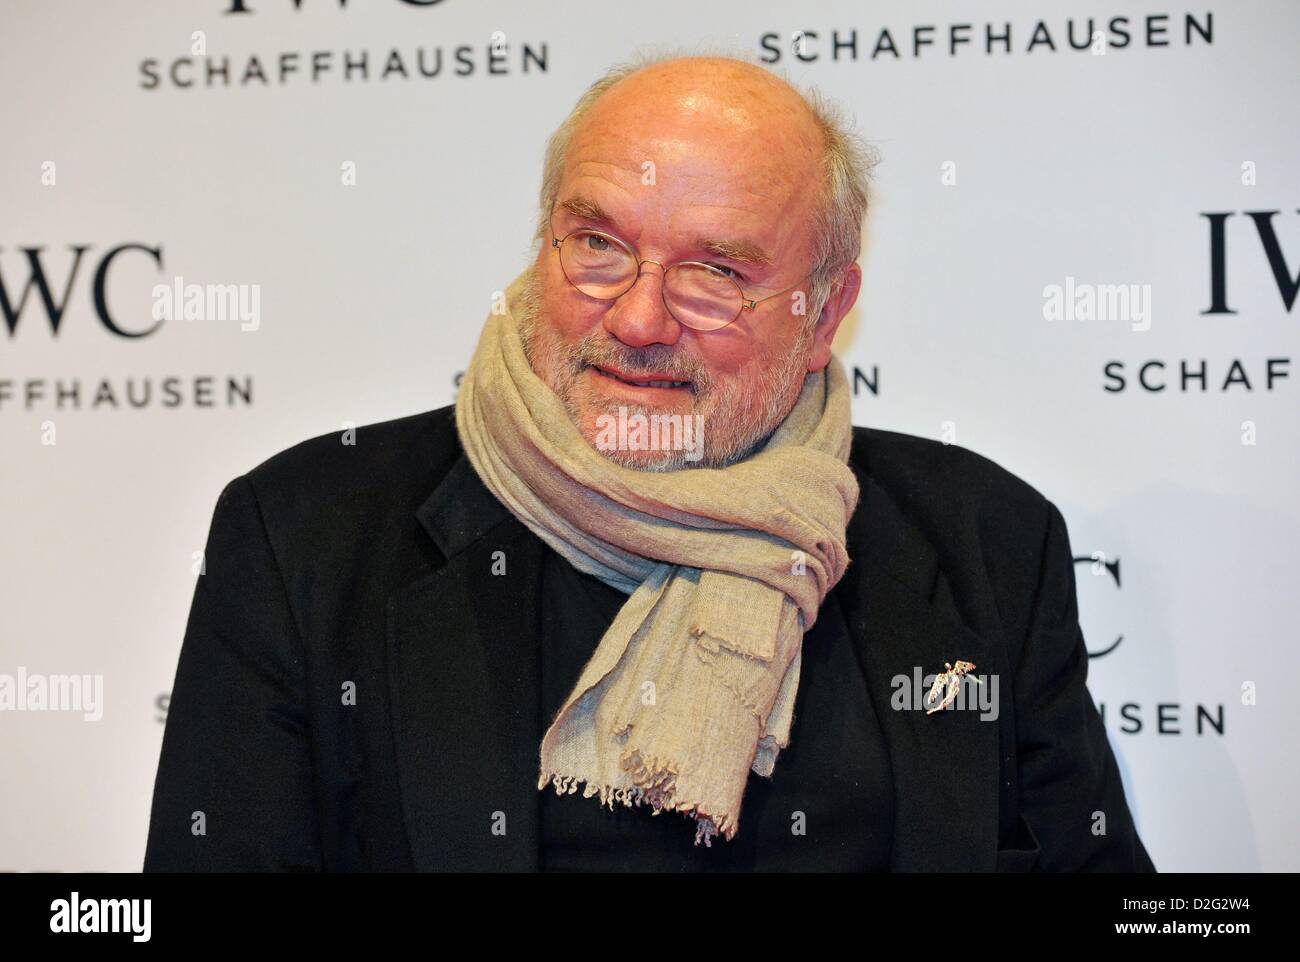 Geneva, Switzerland. 22nd January 2013. Fashion Photographer Peter Lindbergh  attends at IWC Race Night Dinner in Geneva.The swiss watch manufactur  celebrated its new Ingenieur collection as well as the partnershipwith the  Mercedes